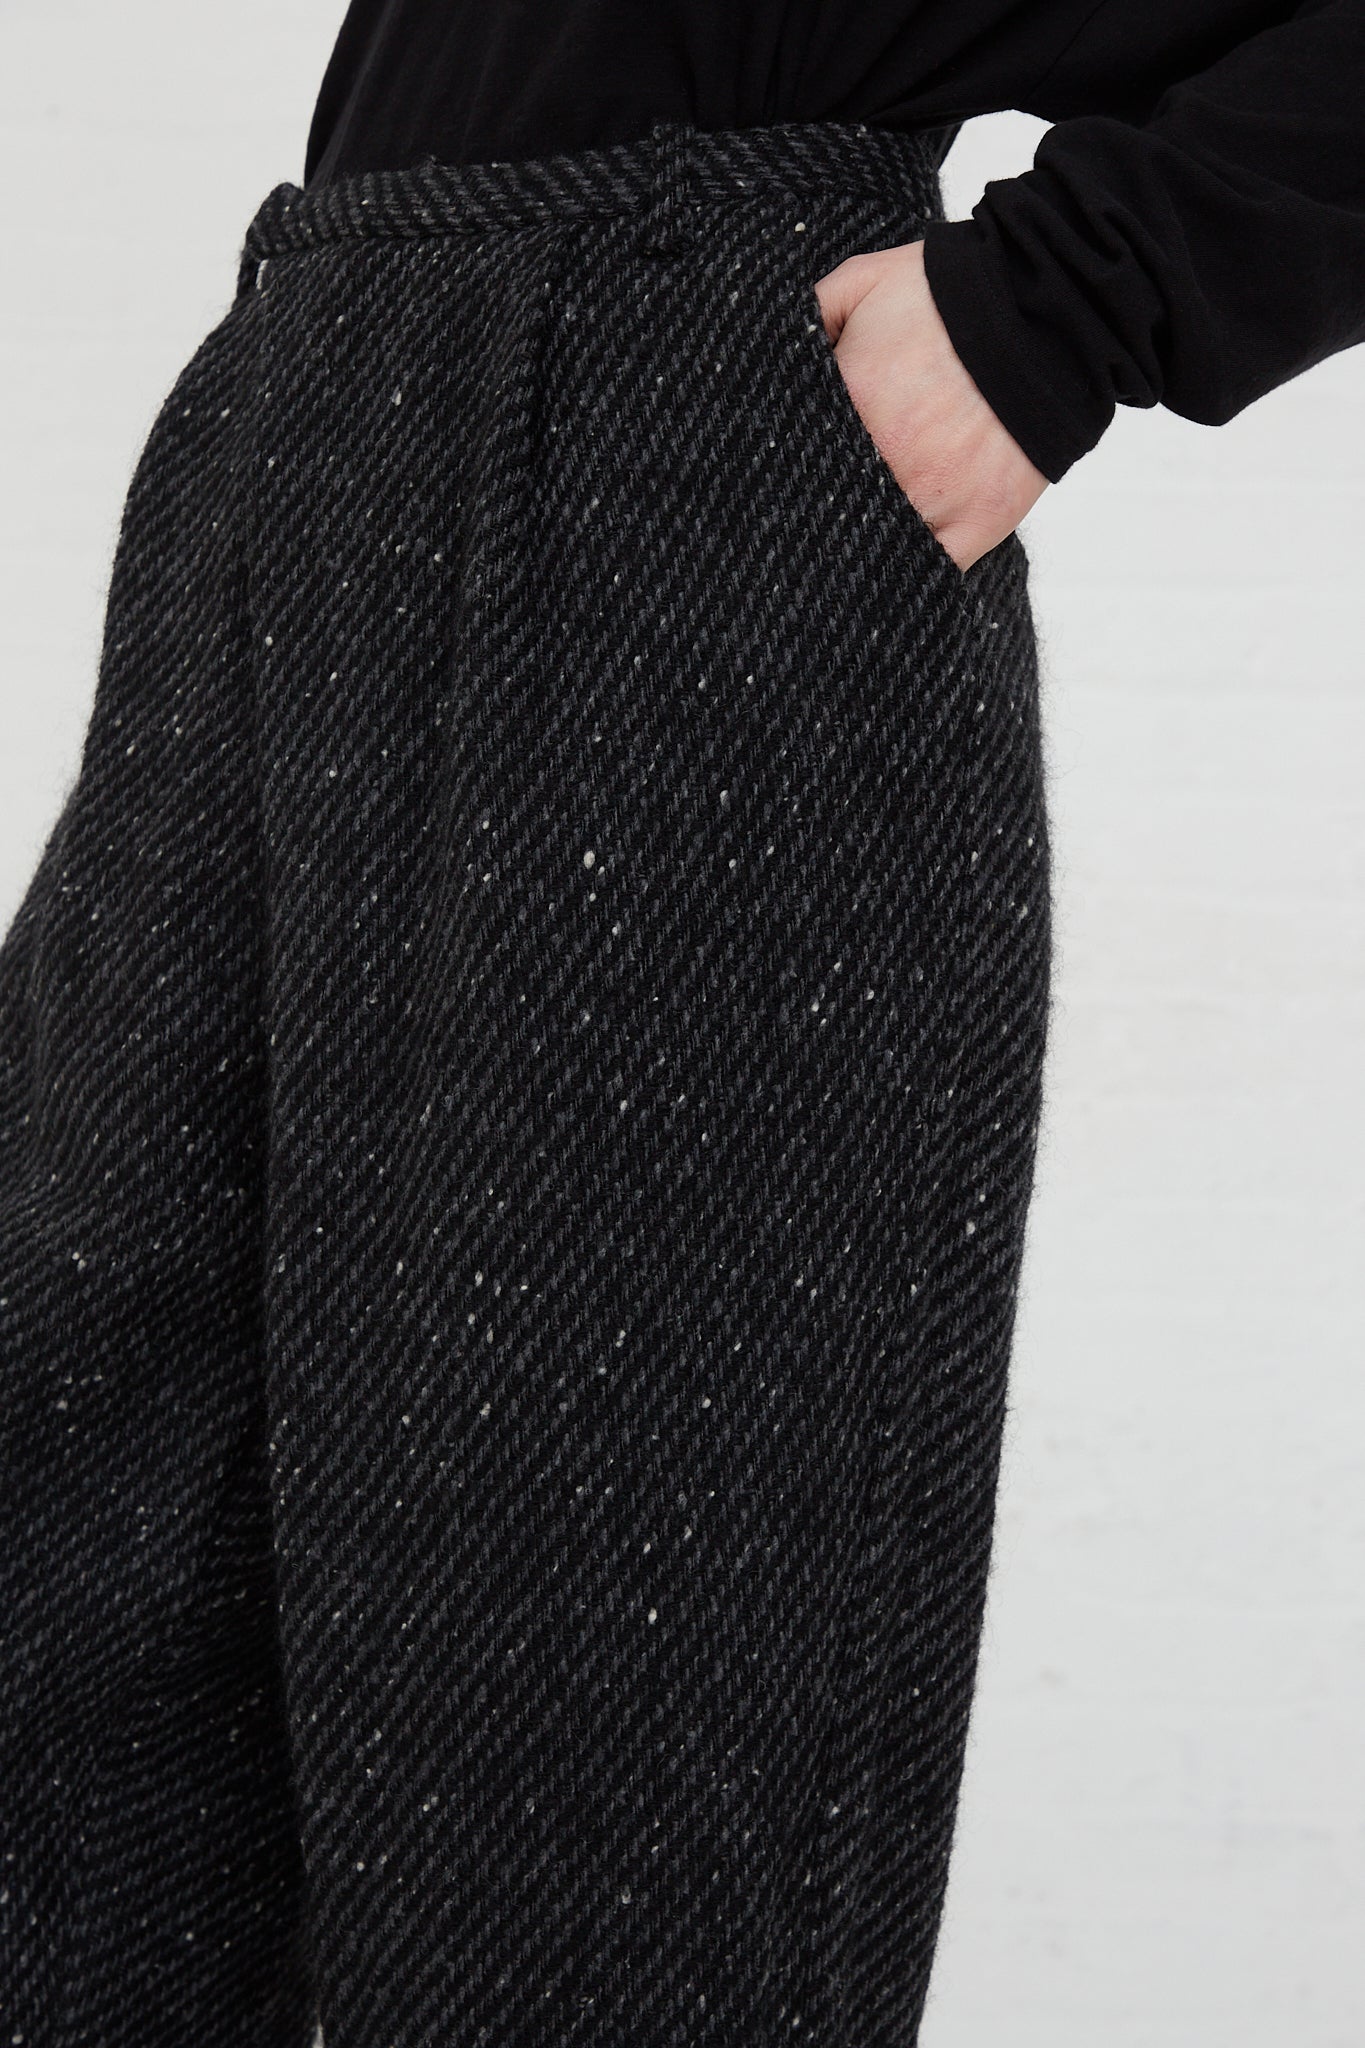 A woman wearing Snow Nep Wool Pant in Black trousers by Ichi Antiquités, featuring a wide leg cut.